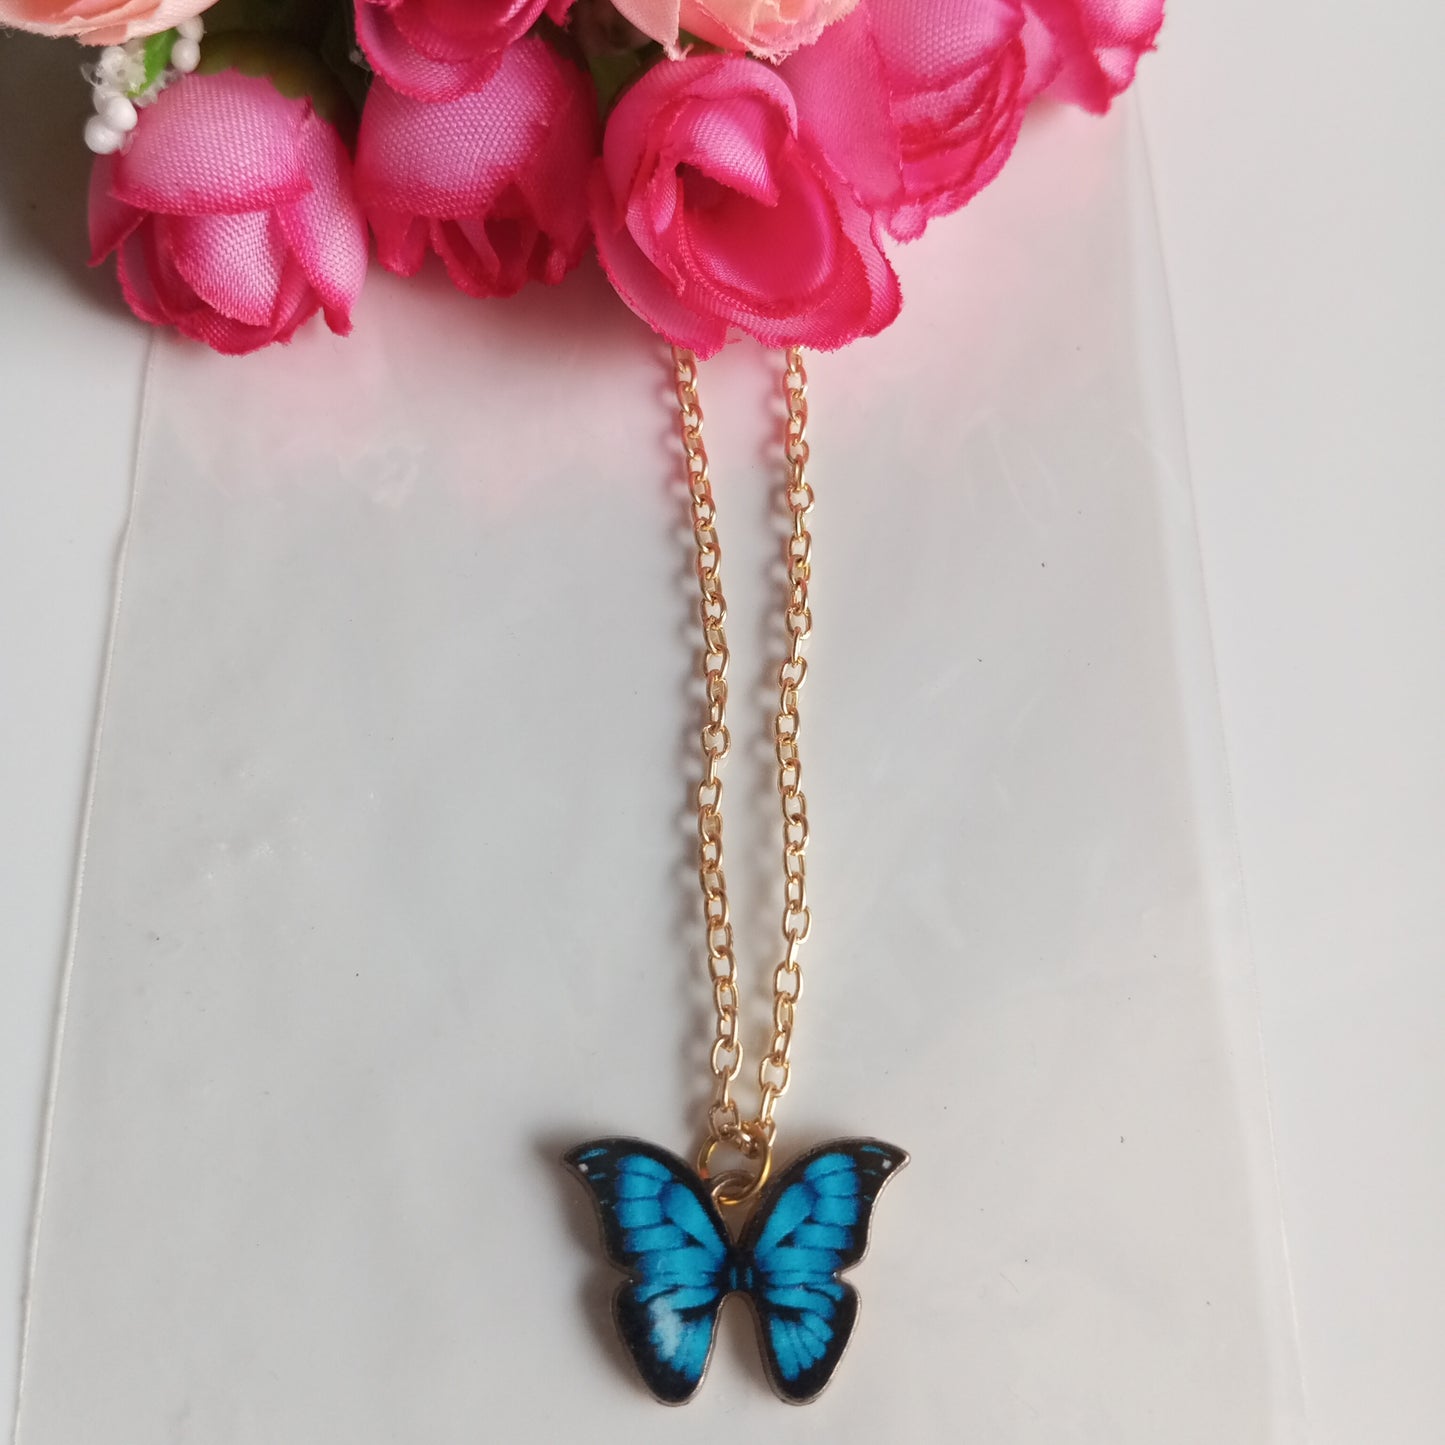 Chain with Pendant- B&B Butterfly